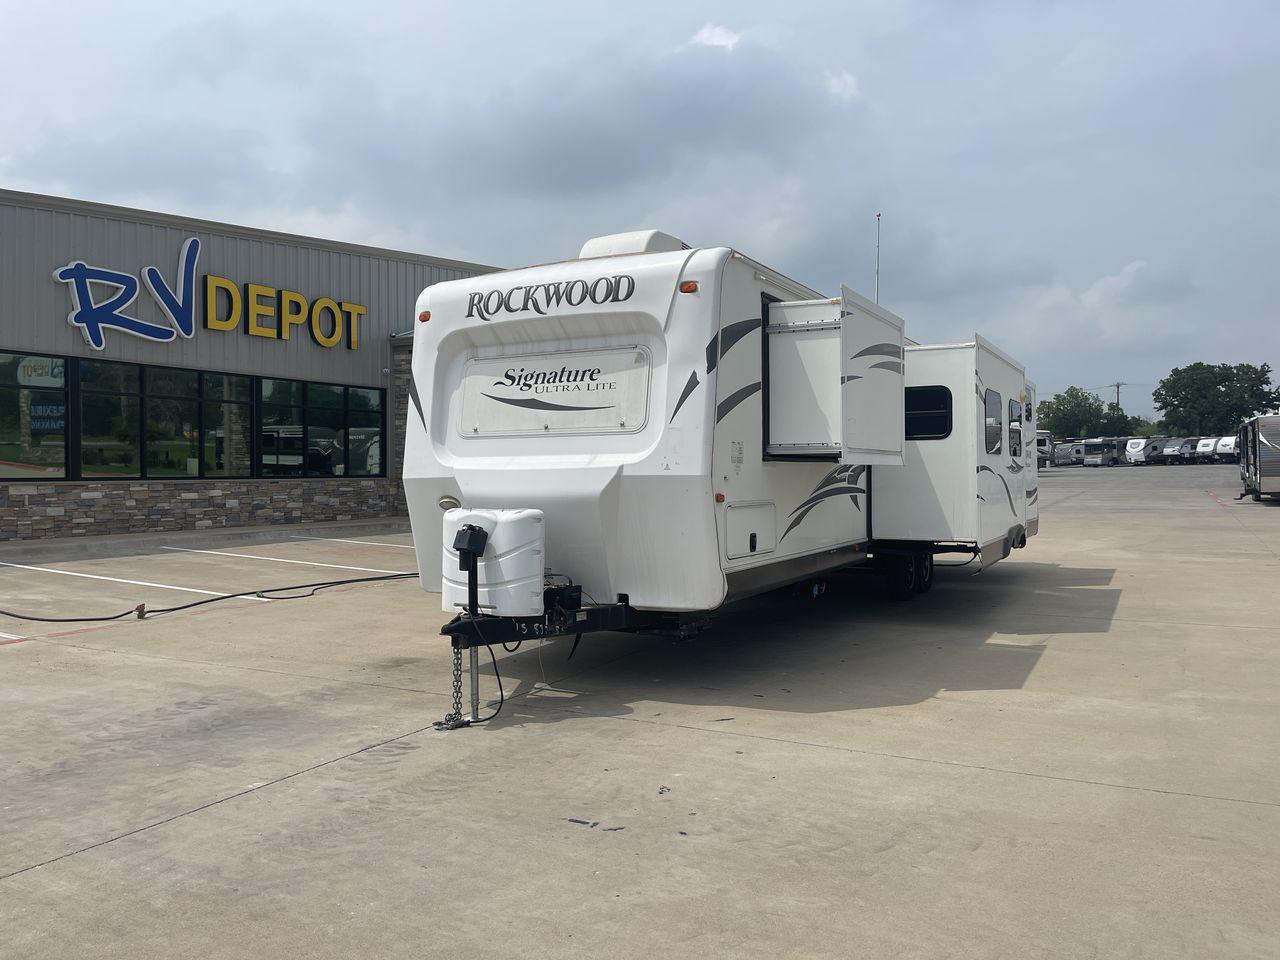 2015 WHITE FOREST RIVER ROCKWOOD 8327SS (4X4TRLH24F1) , Length: 35.25 ft. | Dry Weight: 7,694 lbs. | Gross Weight: 9,150 lbs. | Slides: 4 transmission, located at 4319 N Main Street, Cleburne, TX, 76033, (817) 221-0660, 32.435829, -97.384178 - This 2015 Forest River Rockwood 8327SS travel trailer measures 35.25 ft. It has a width of 8 ft and a height of 9.83 ft. The dry weight is 7,694 lbs, and the payload capacity is 1,456 lbs. It has a GVWR of 9,150 lbs and a hitch weight of 1,035 lbs. It is constructed out of aluminum body material and - Photo #0